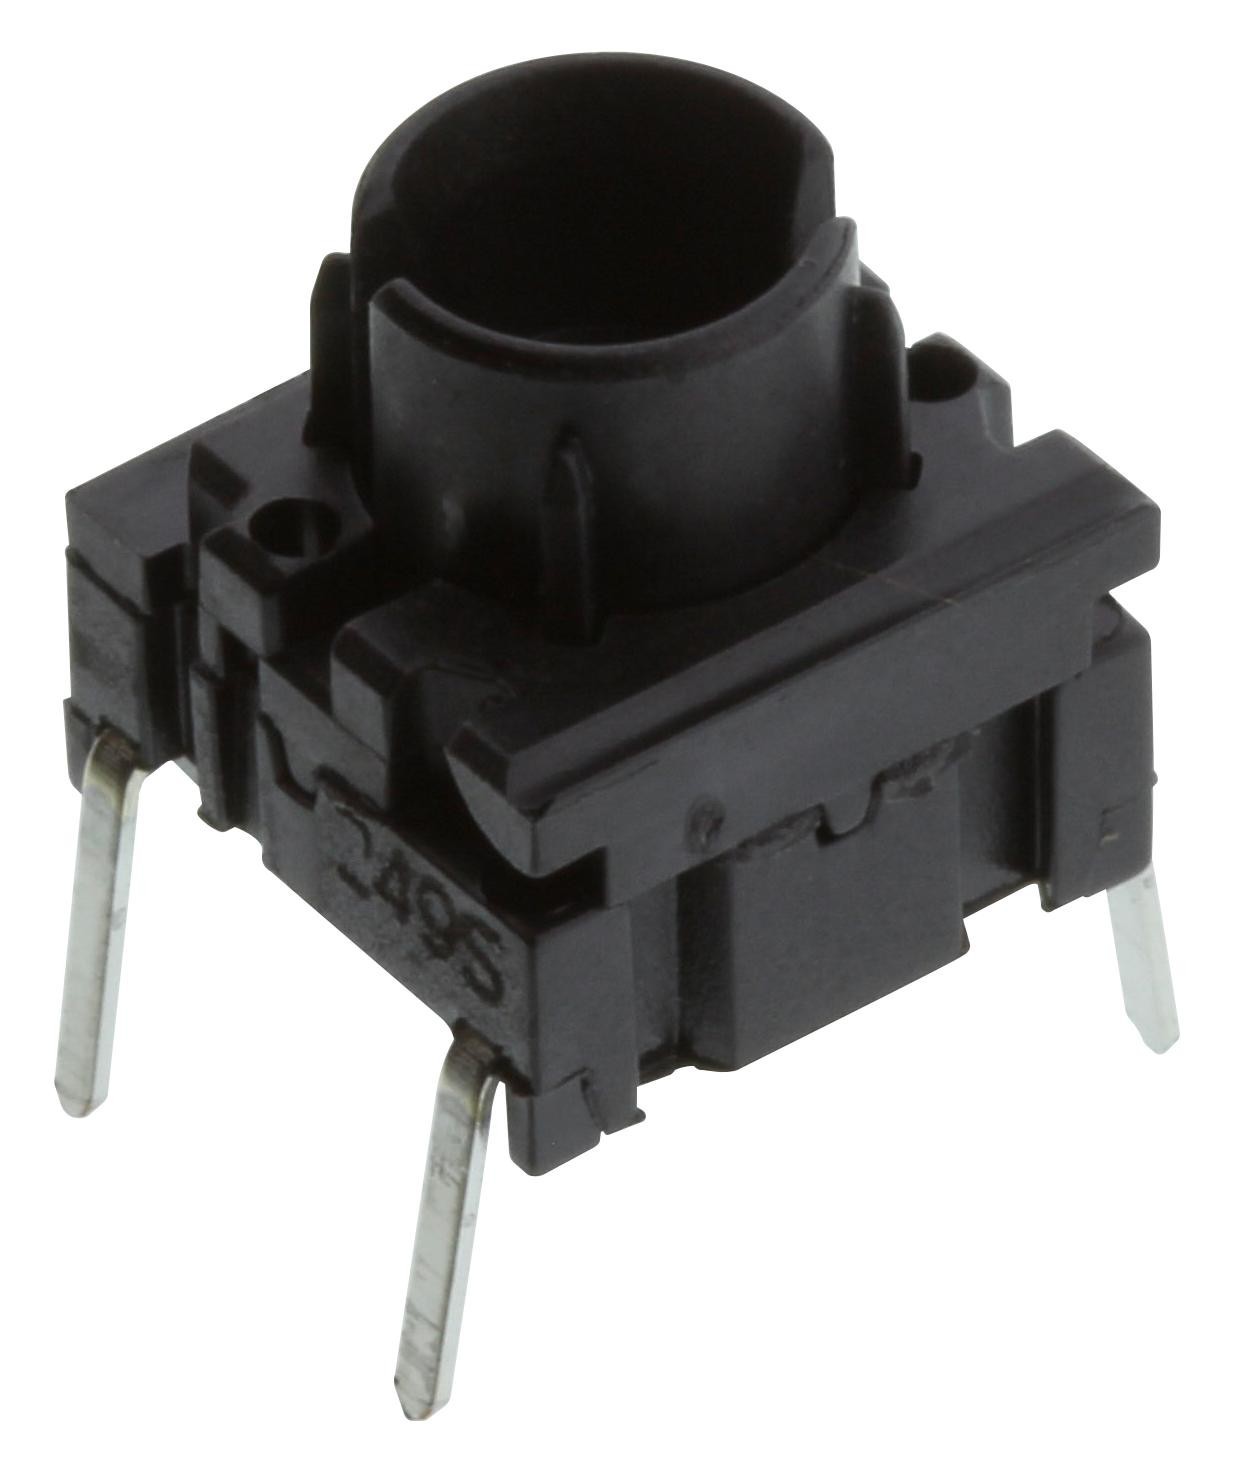 APEM 3Fth9 Tactile Switch, 0.05A, 24Vdc, Th